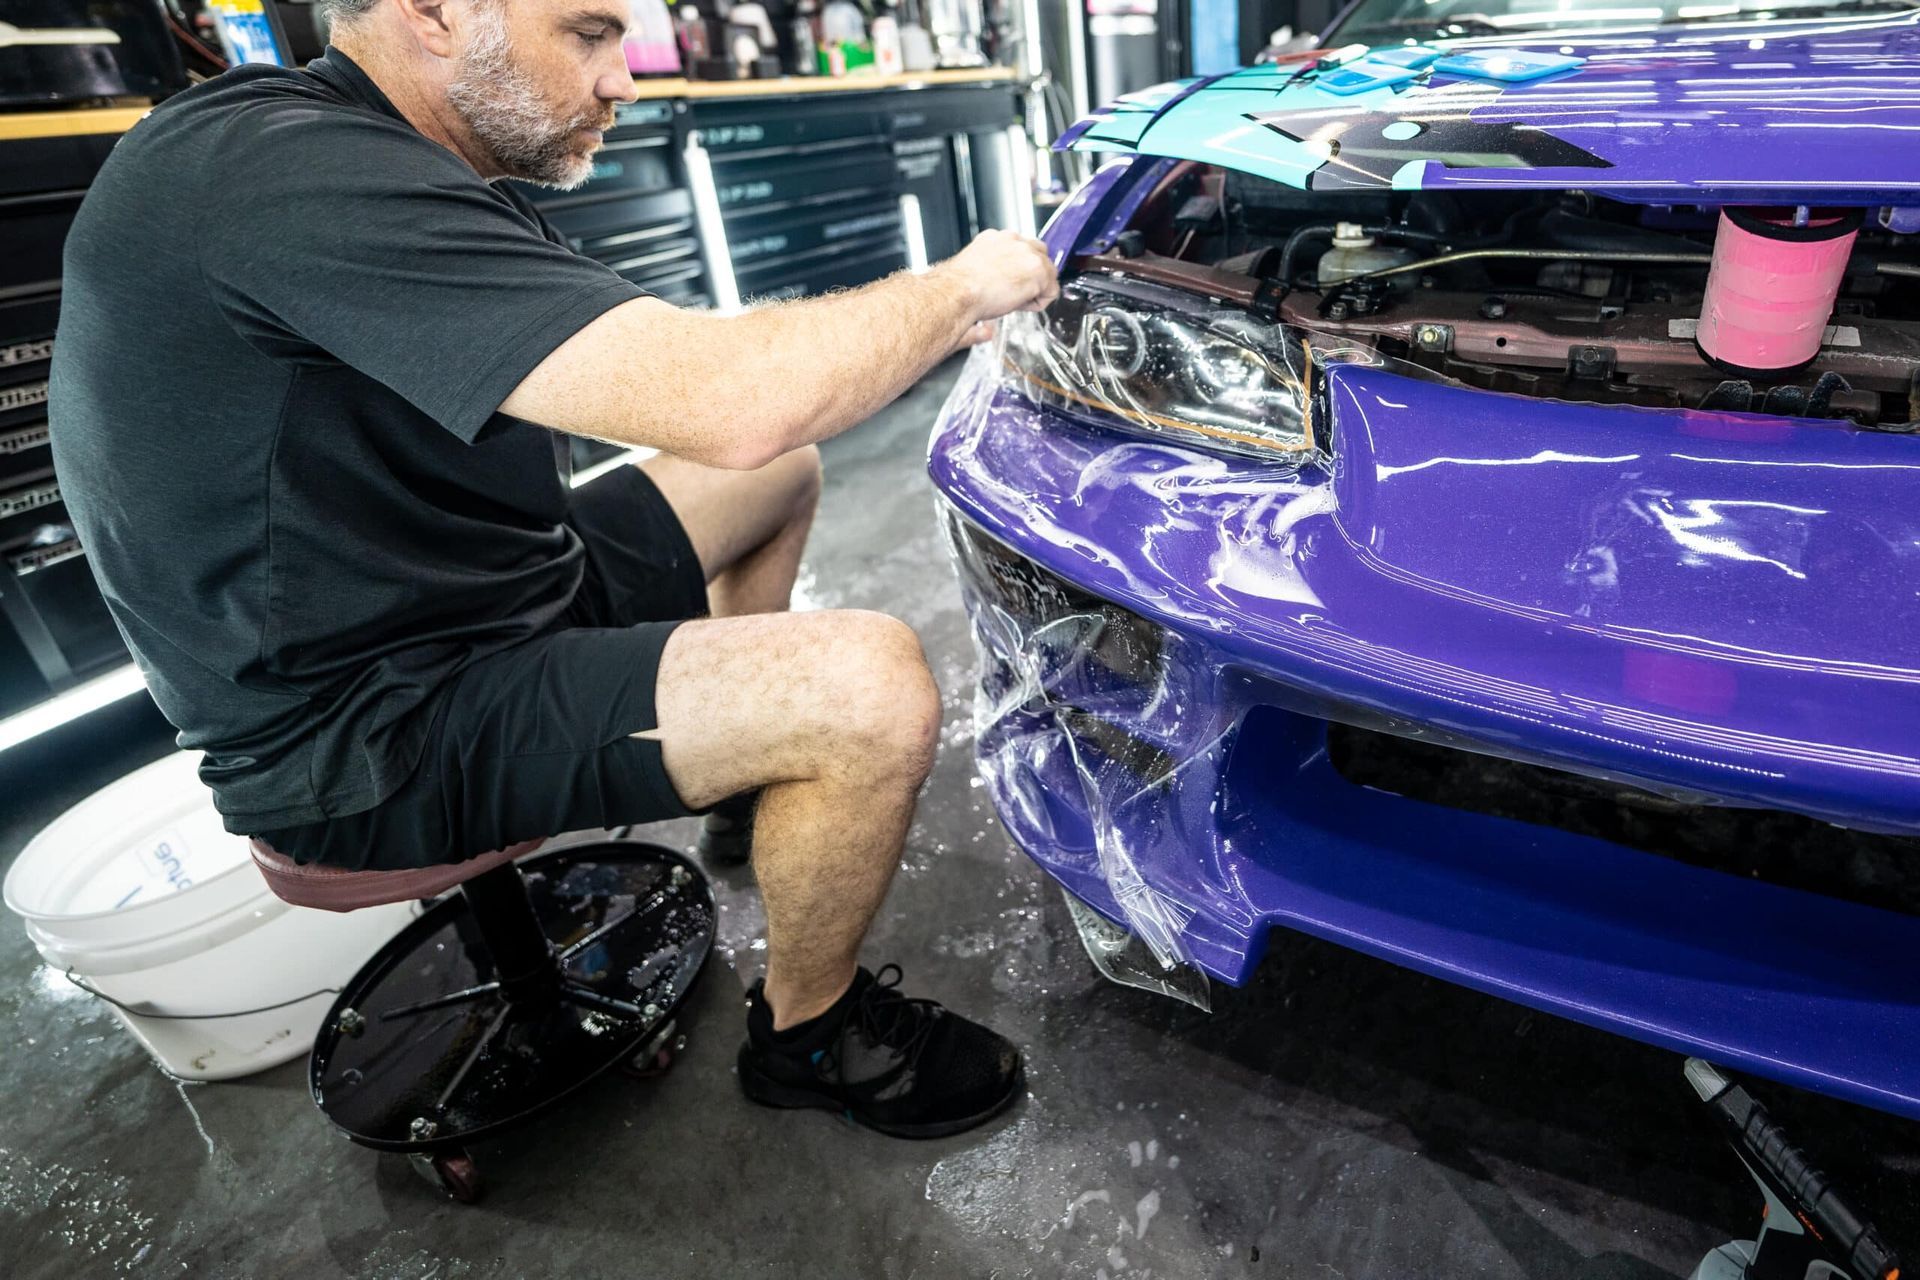 A man is sitting on a stool wrapping a purple car.